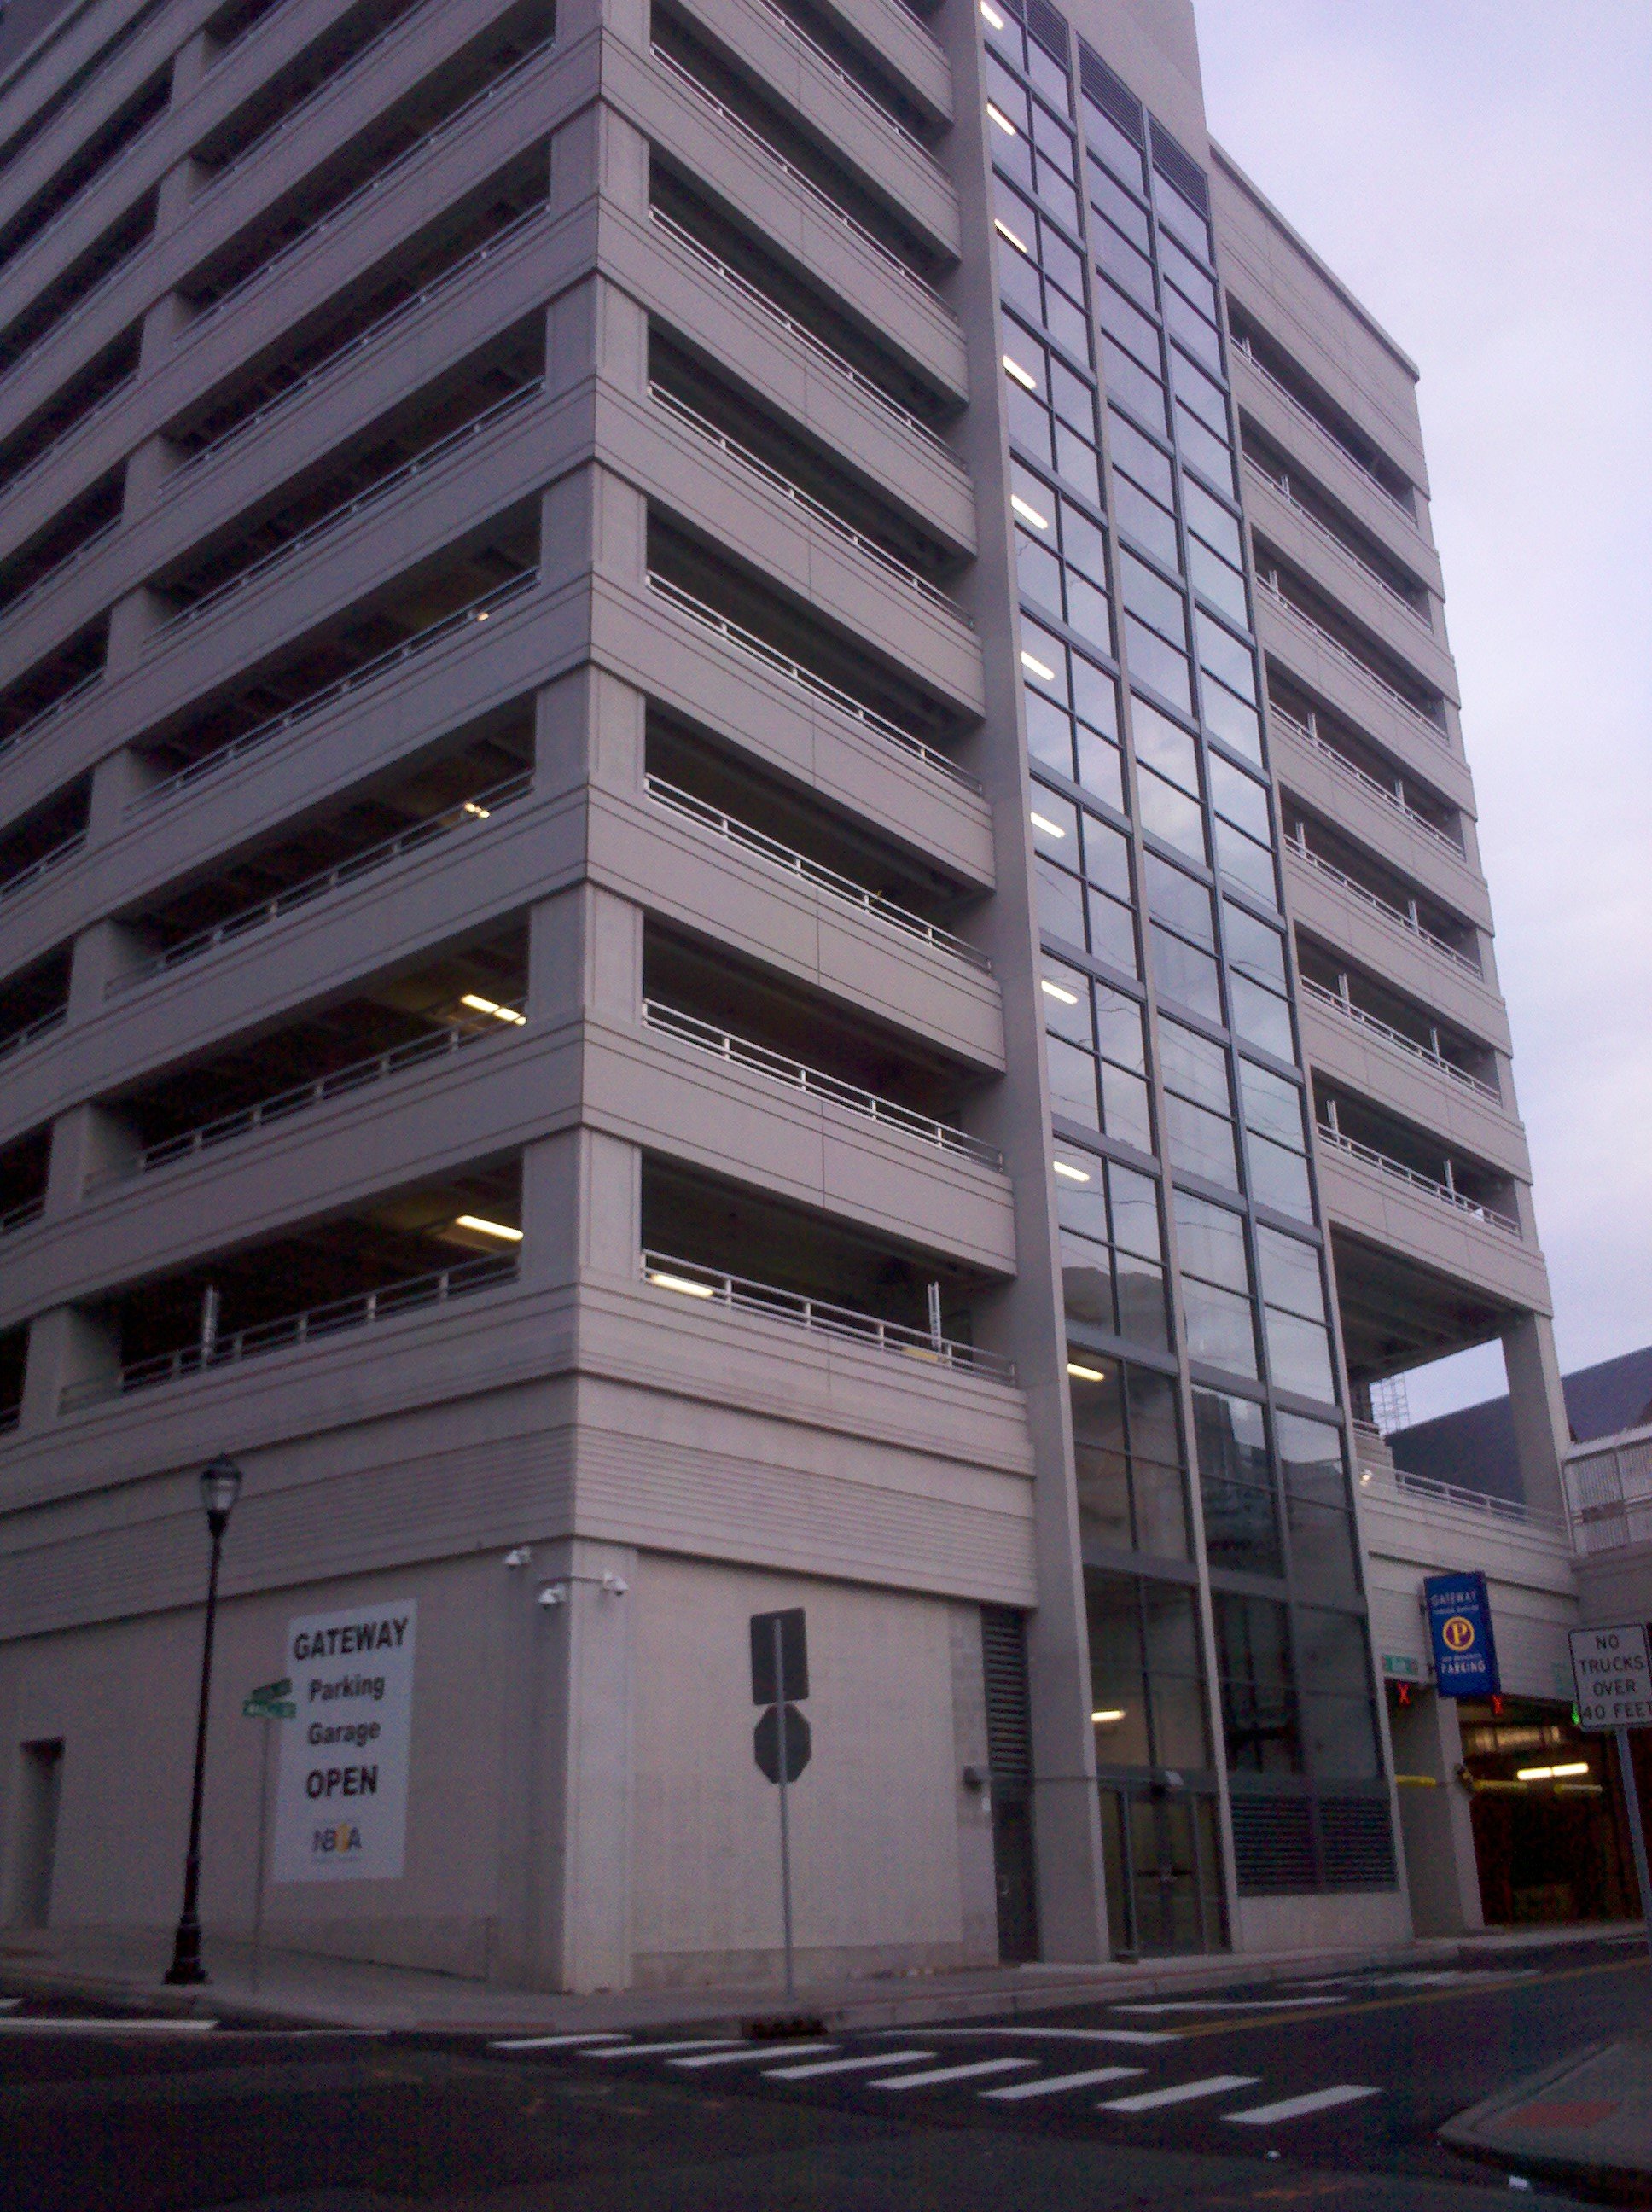 The NBPAs New "Gateway Center Parking Garage" Opened to The Public on November 15.